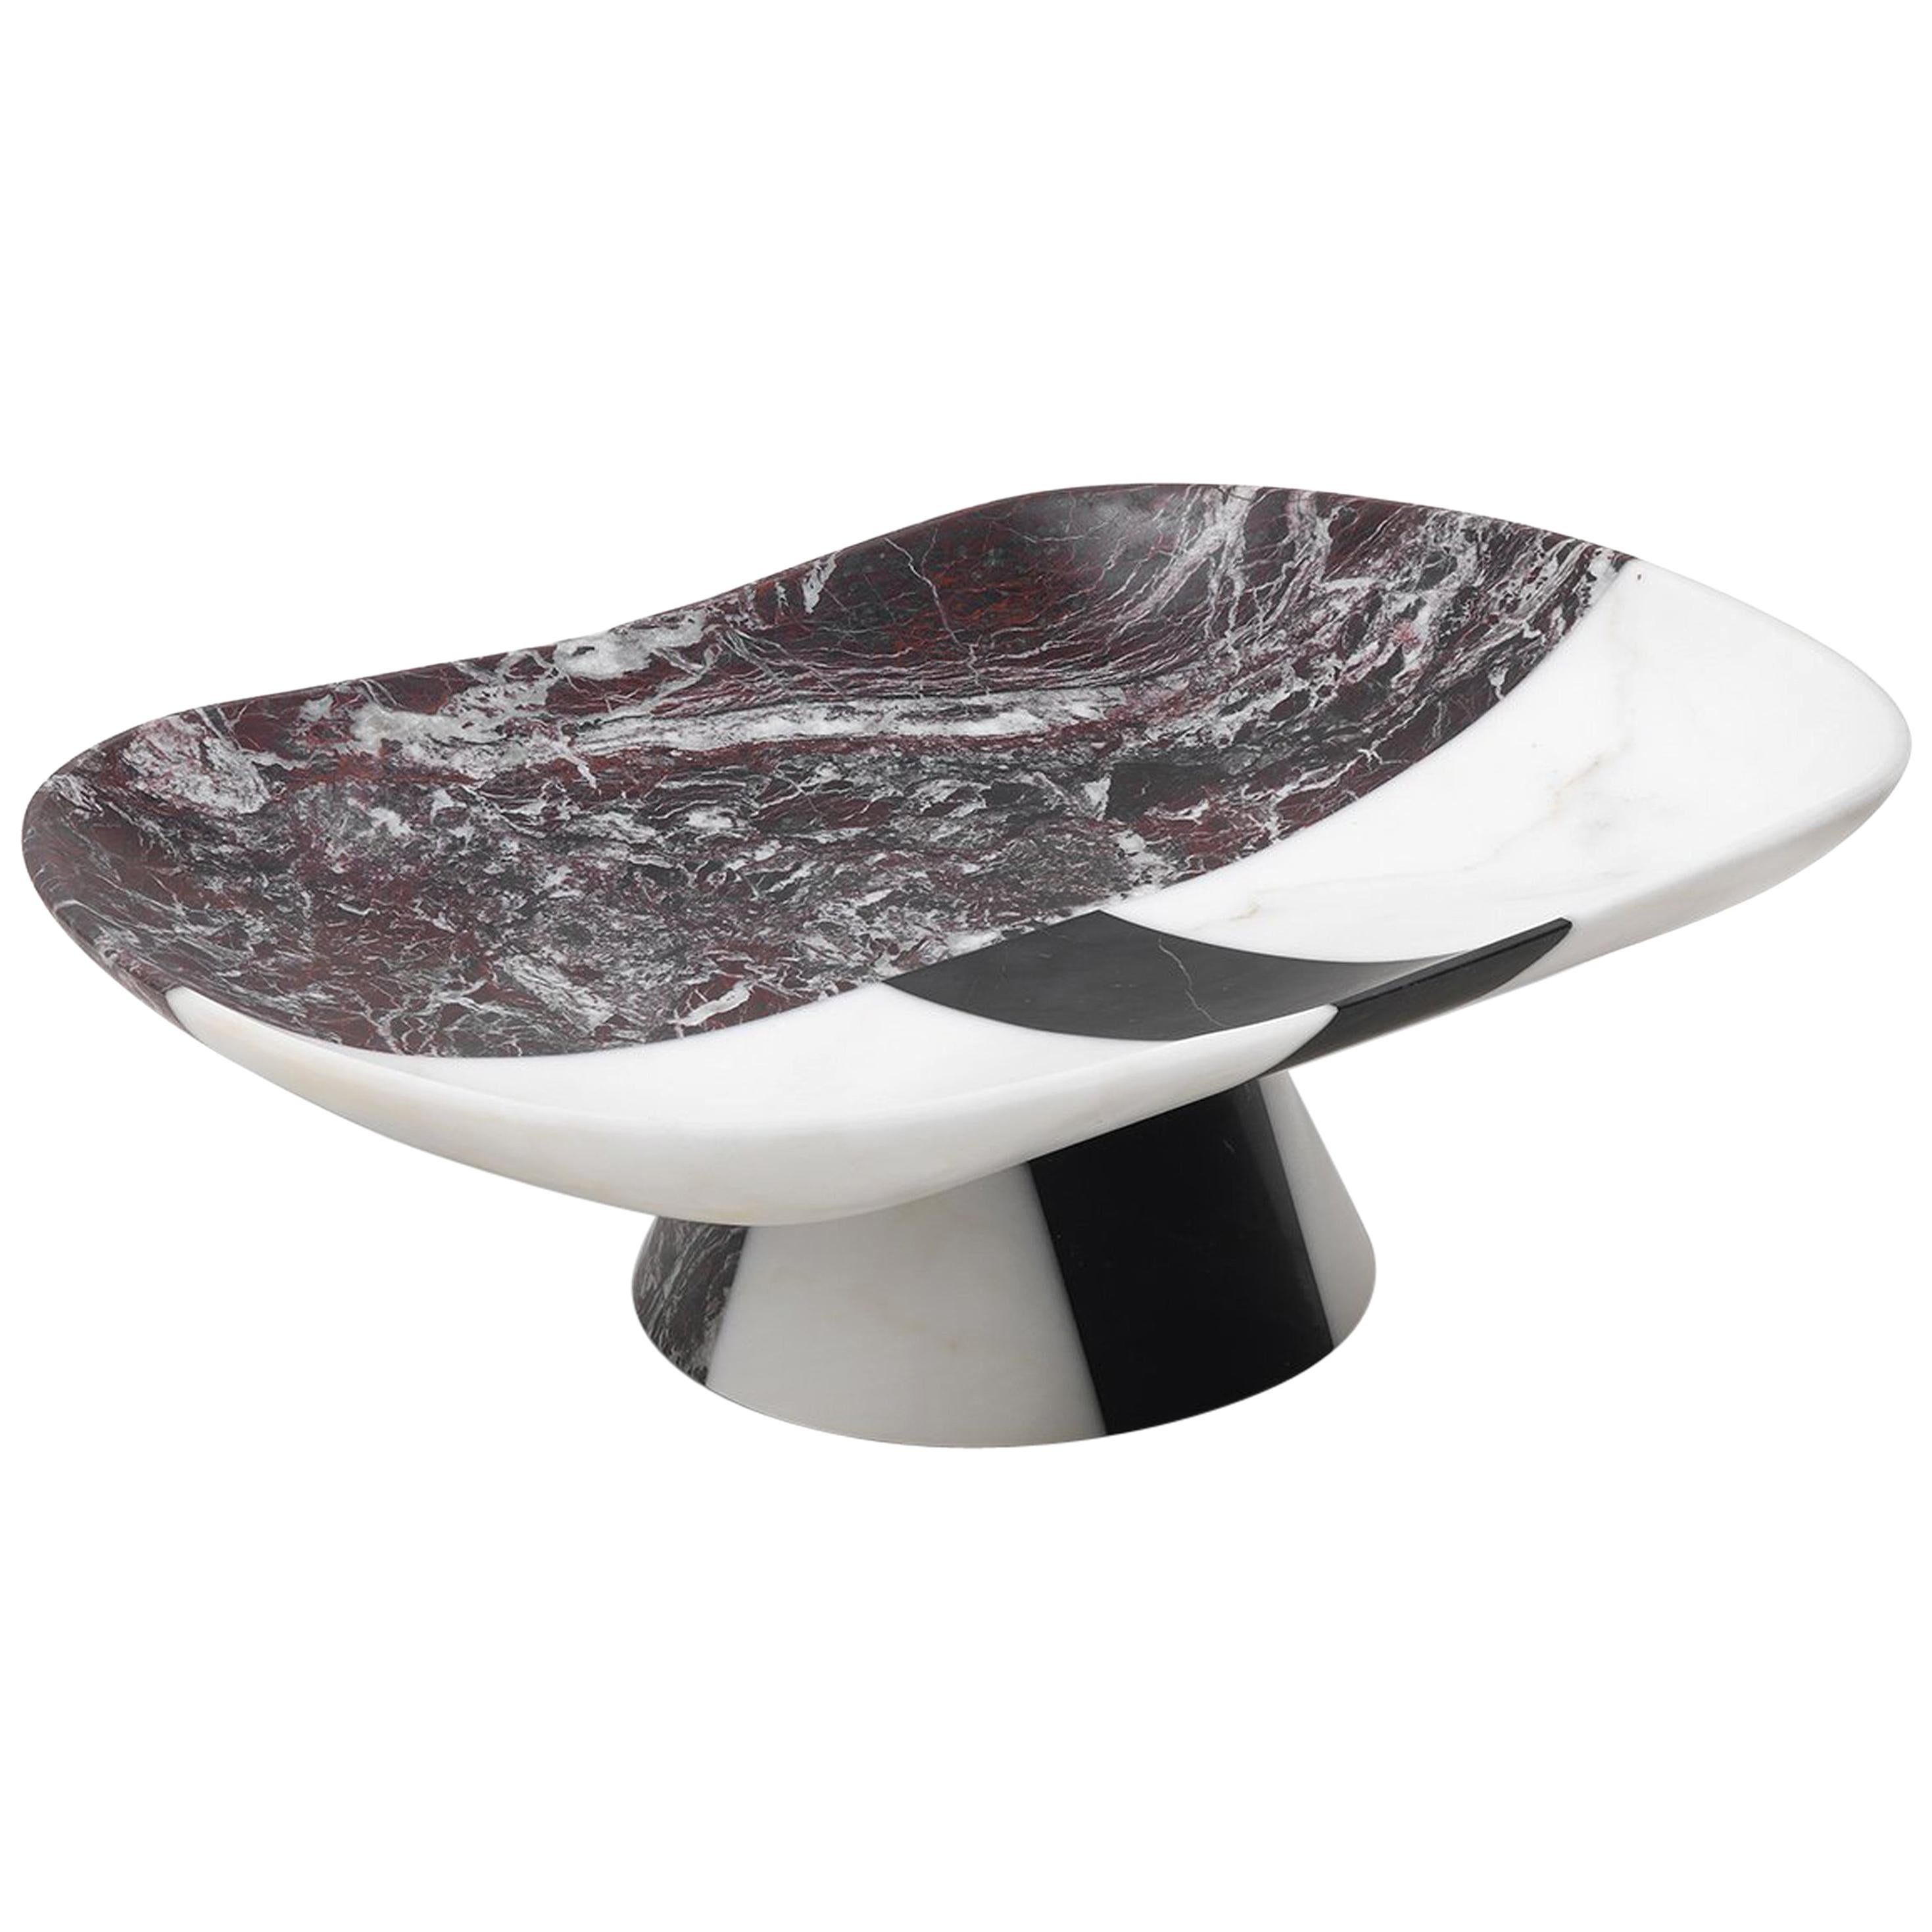 Centrepiece in White, Black and Red Marble by Matteo Cibic, Italy, Stock